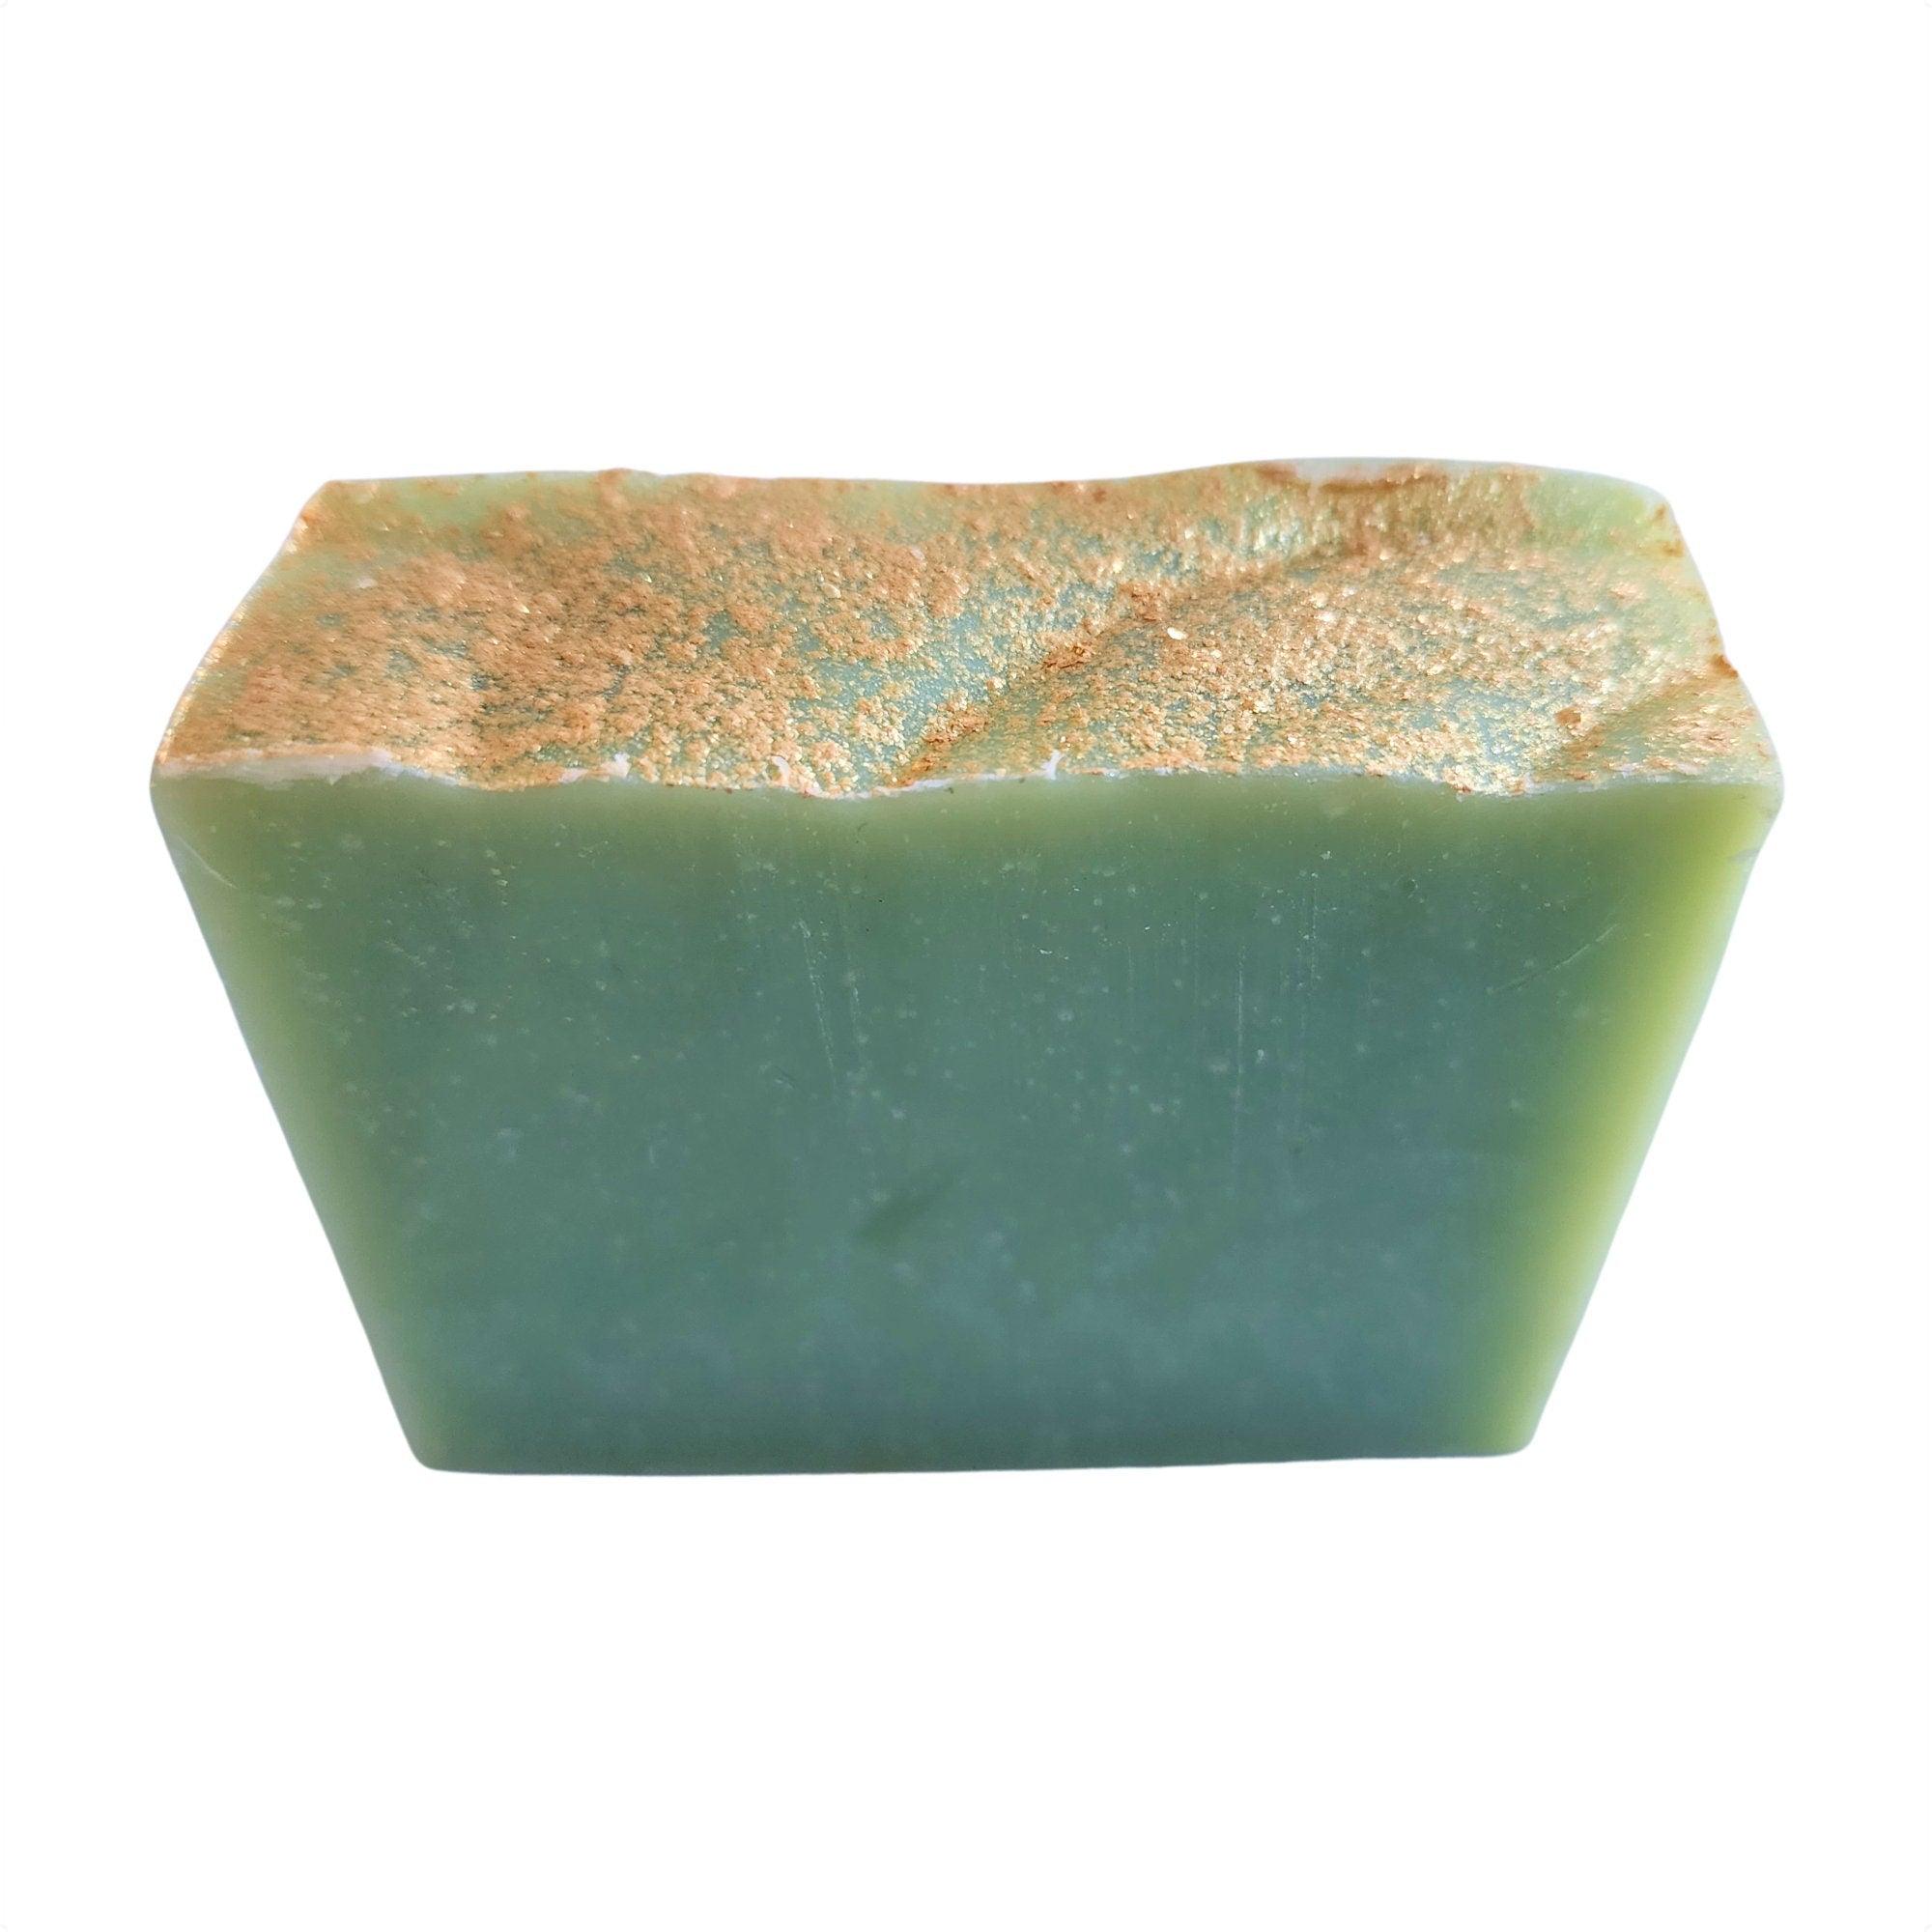 Sparkling Apple Soap - Life In Alignment